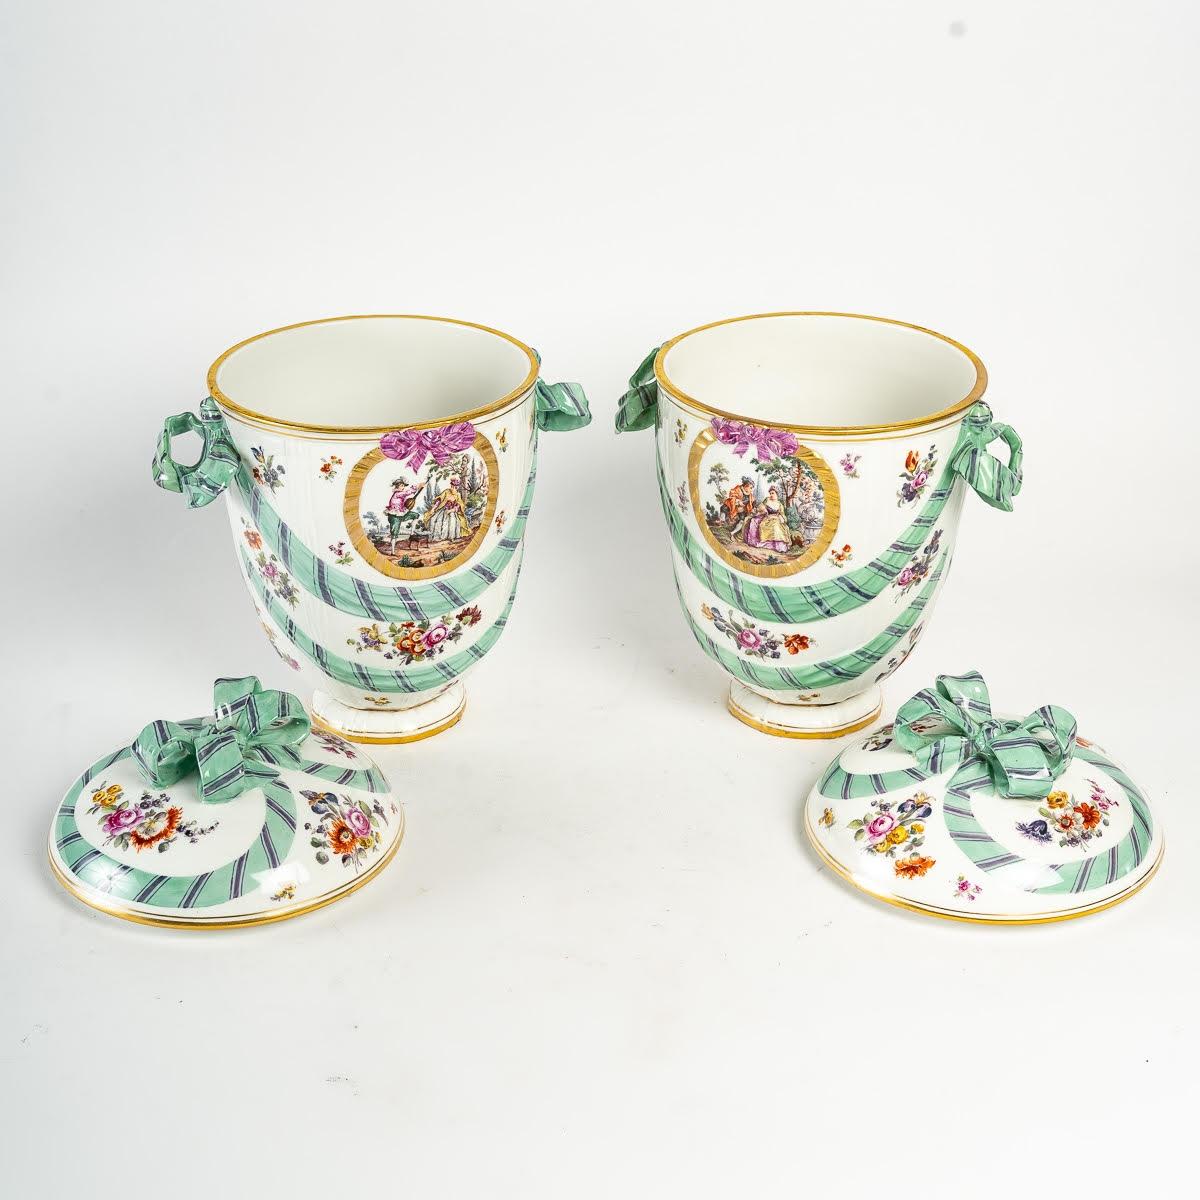 Pair of Large KPM Porcelain Covered Pots, 19th Century. For Sale 5